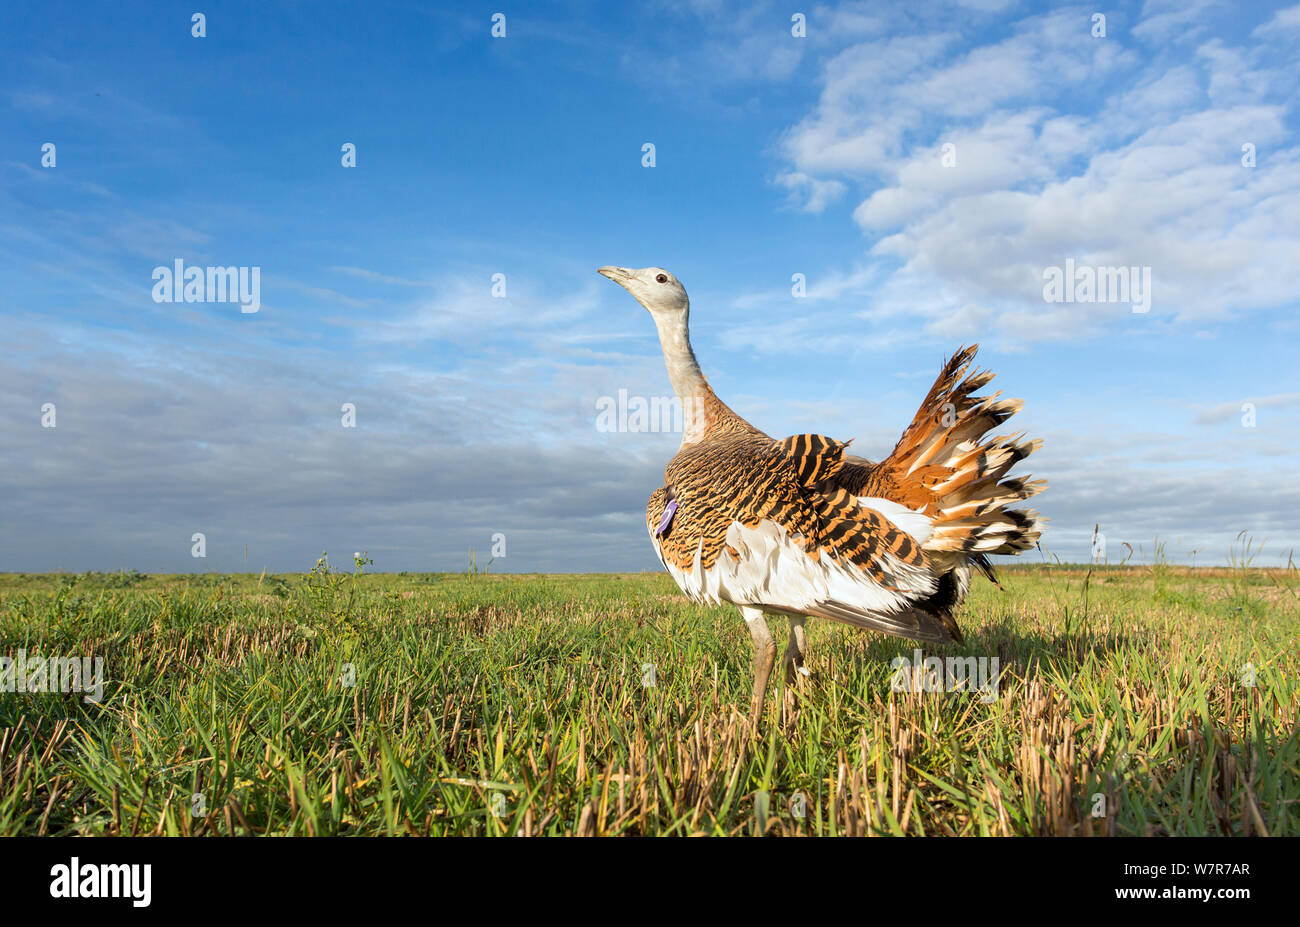 Great Bustard (Otis tarda) Salisbury Plain, part of a reintroduction project with birds imported under DEFRA licence from Russia. Salisbury Plain, Wiltshire, England, October 2012 Stock Photo